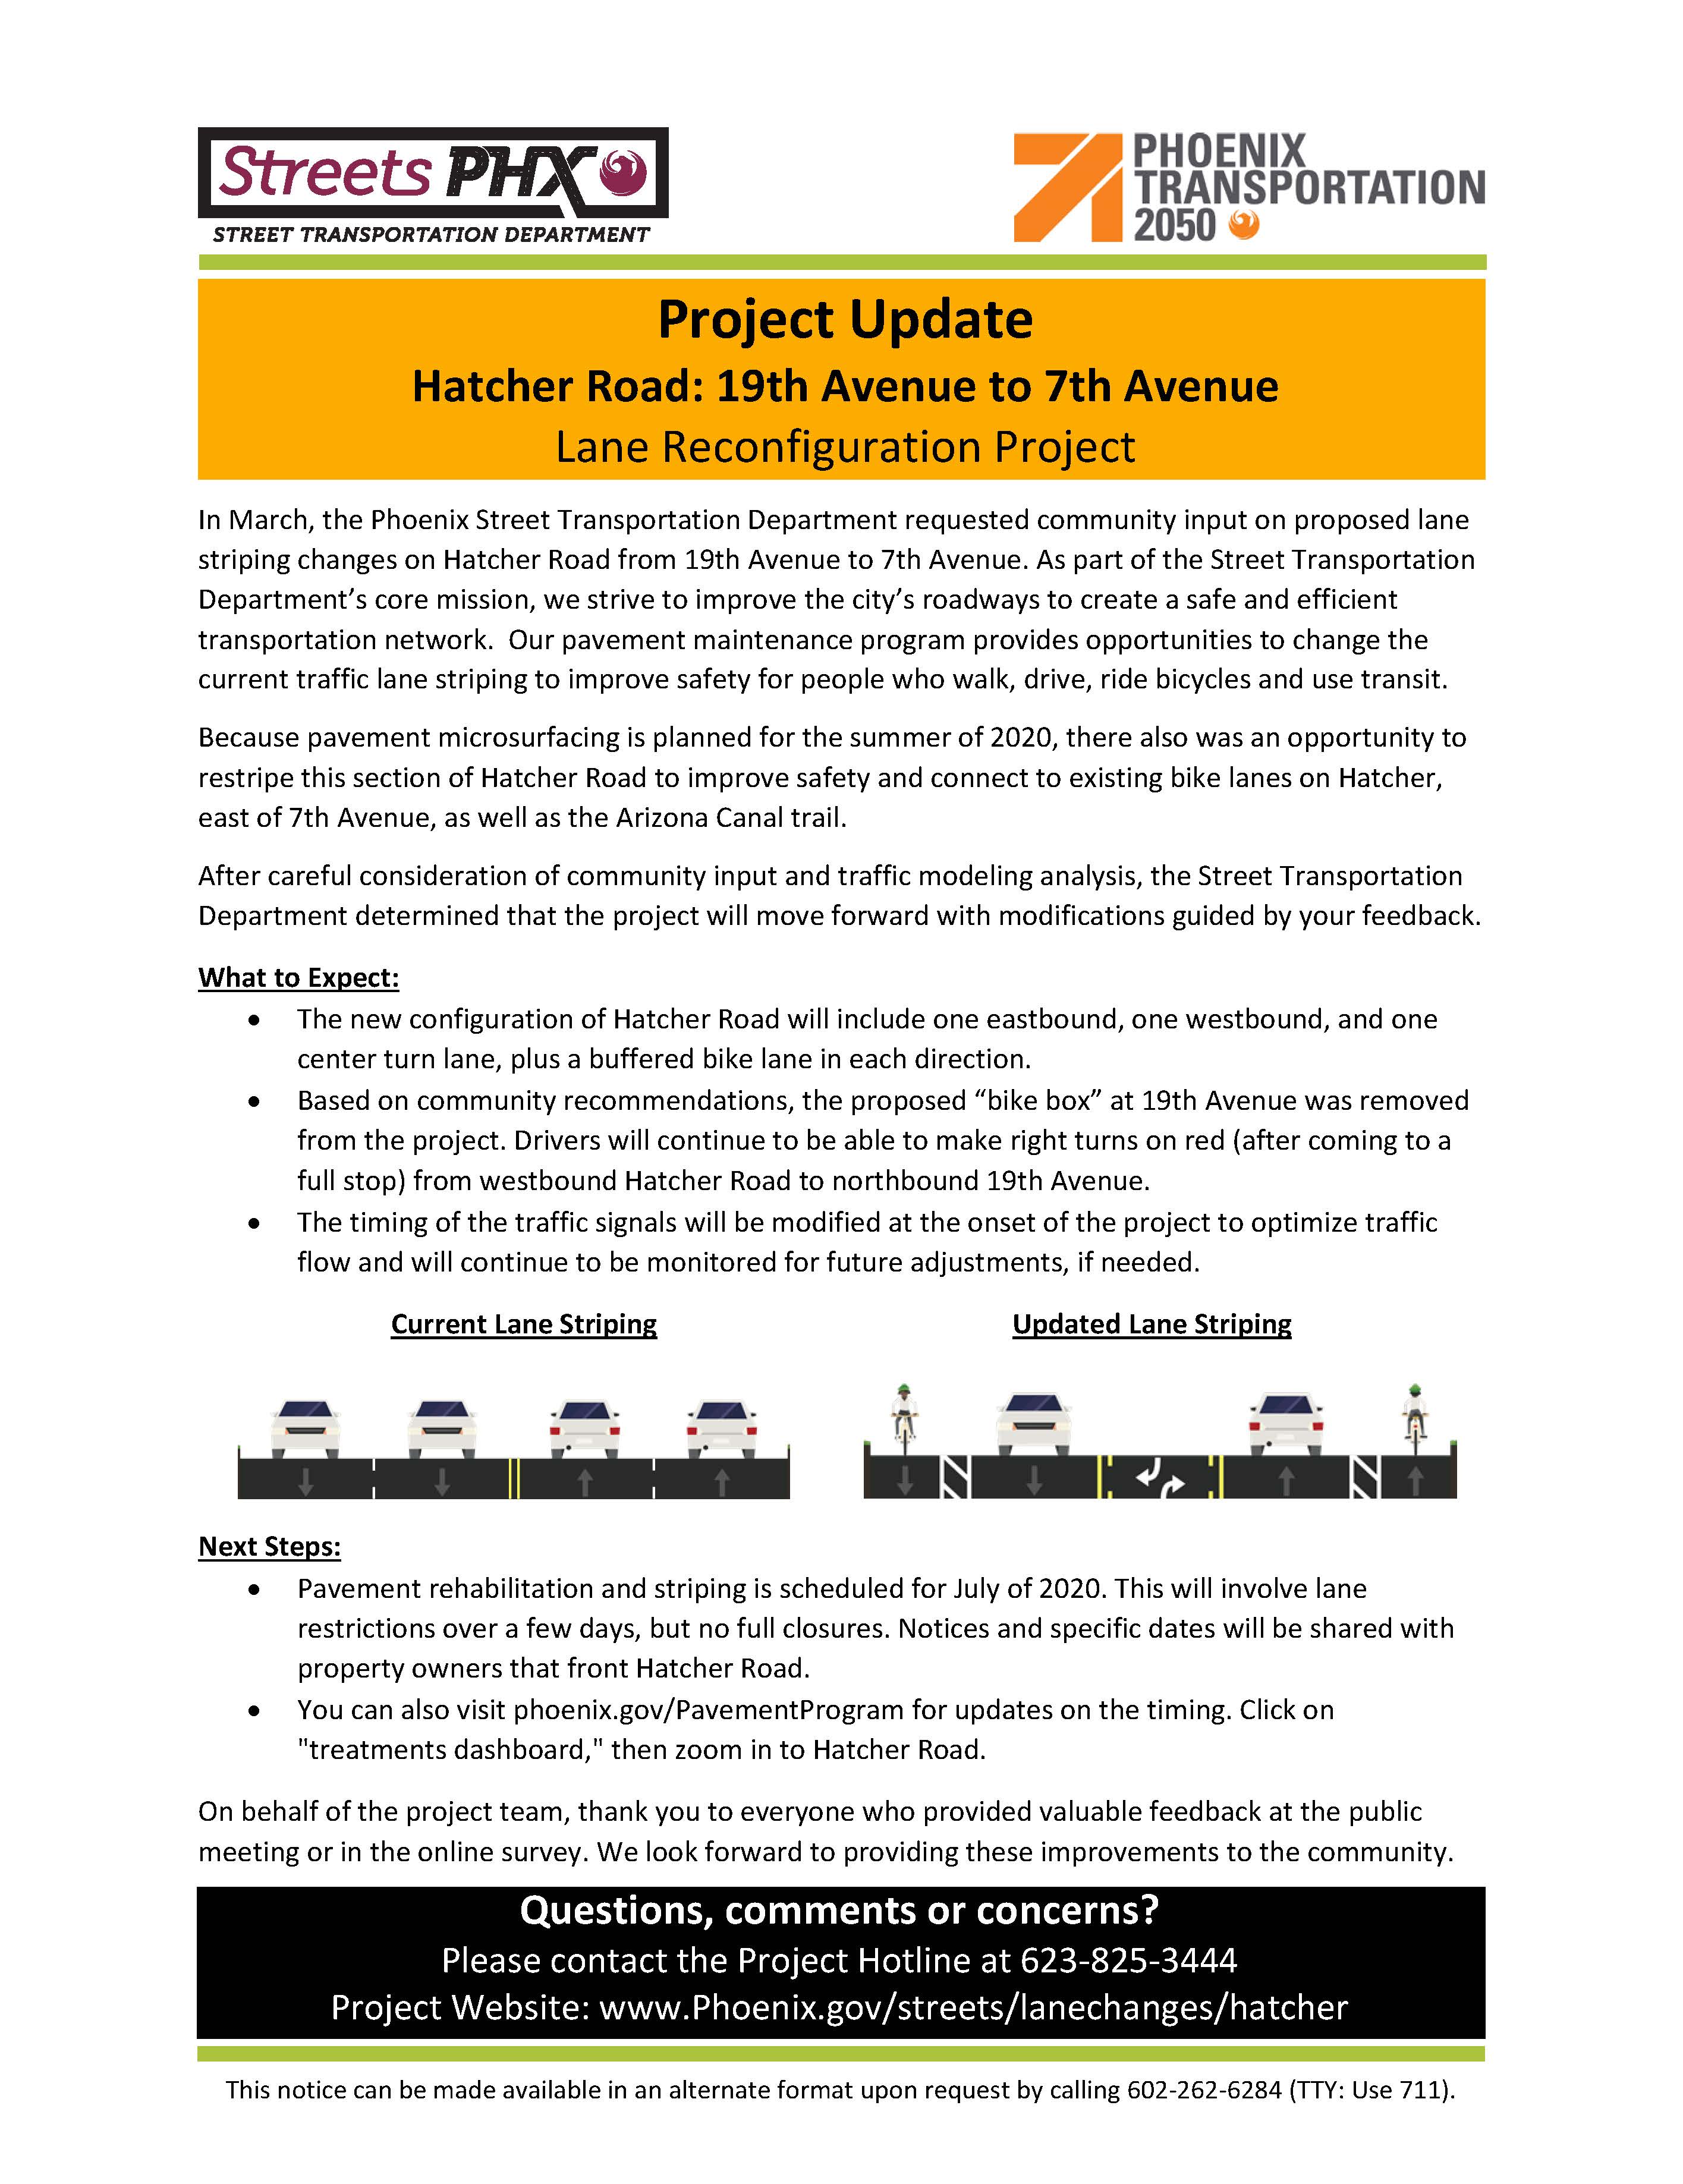 May 7, 2020 Project Update for Hatcher Road